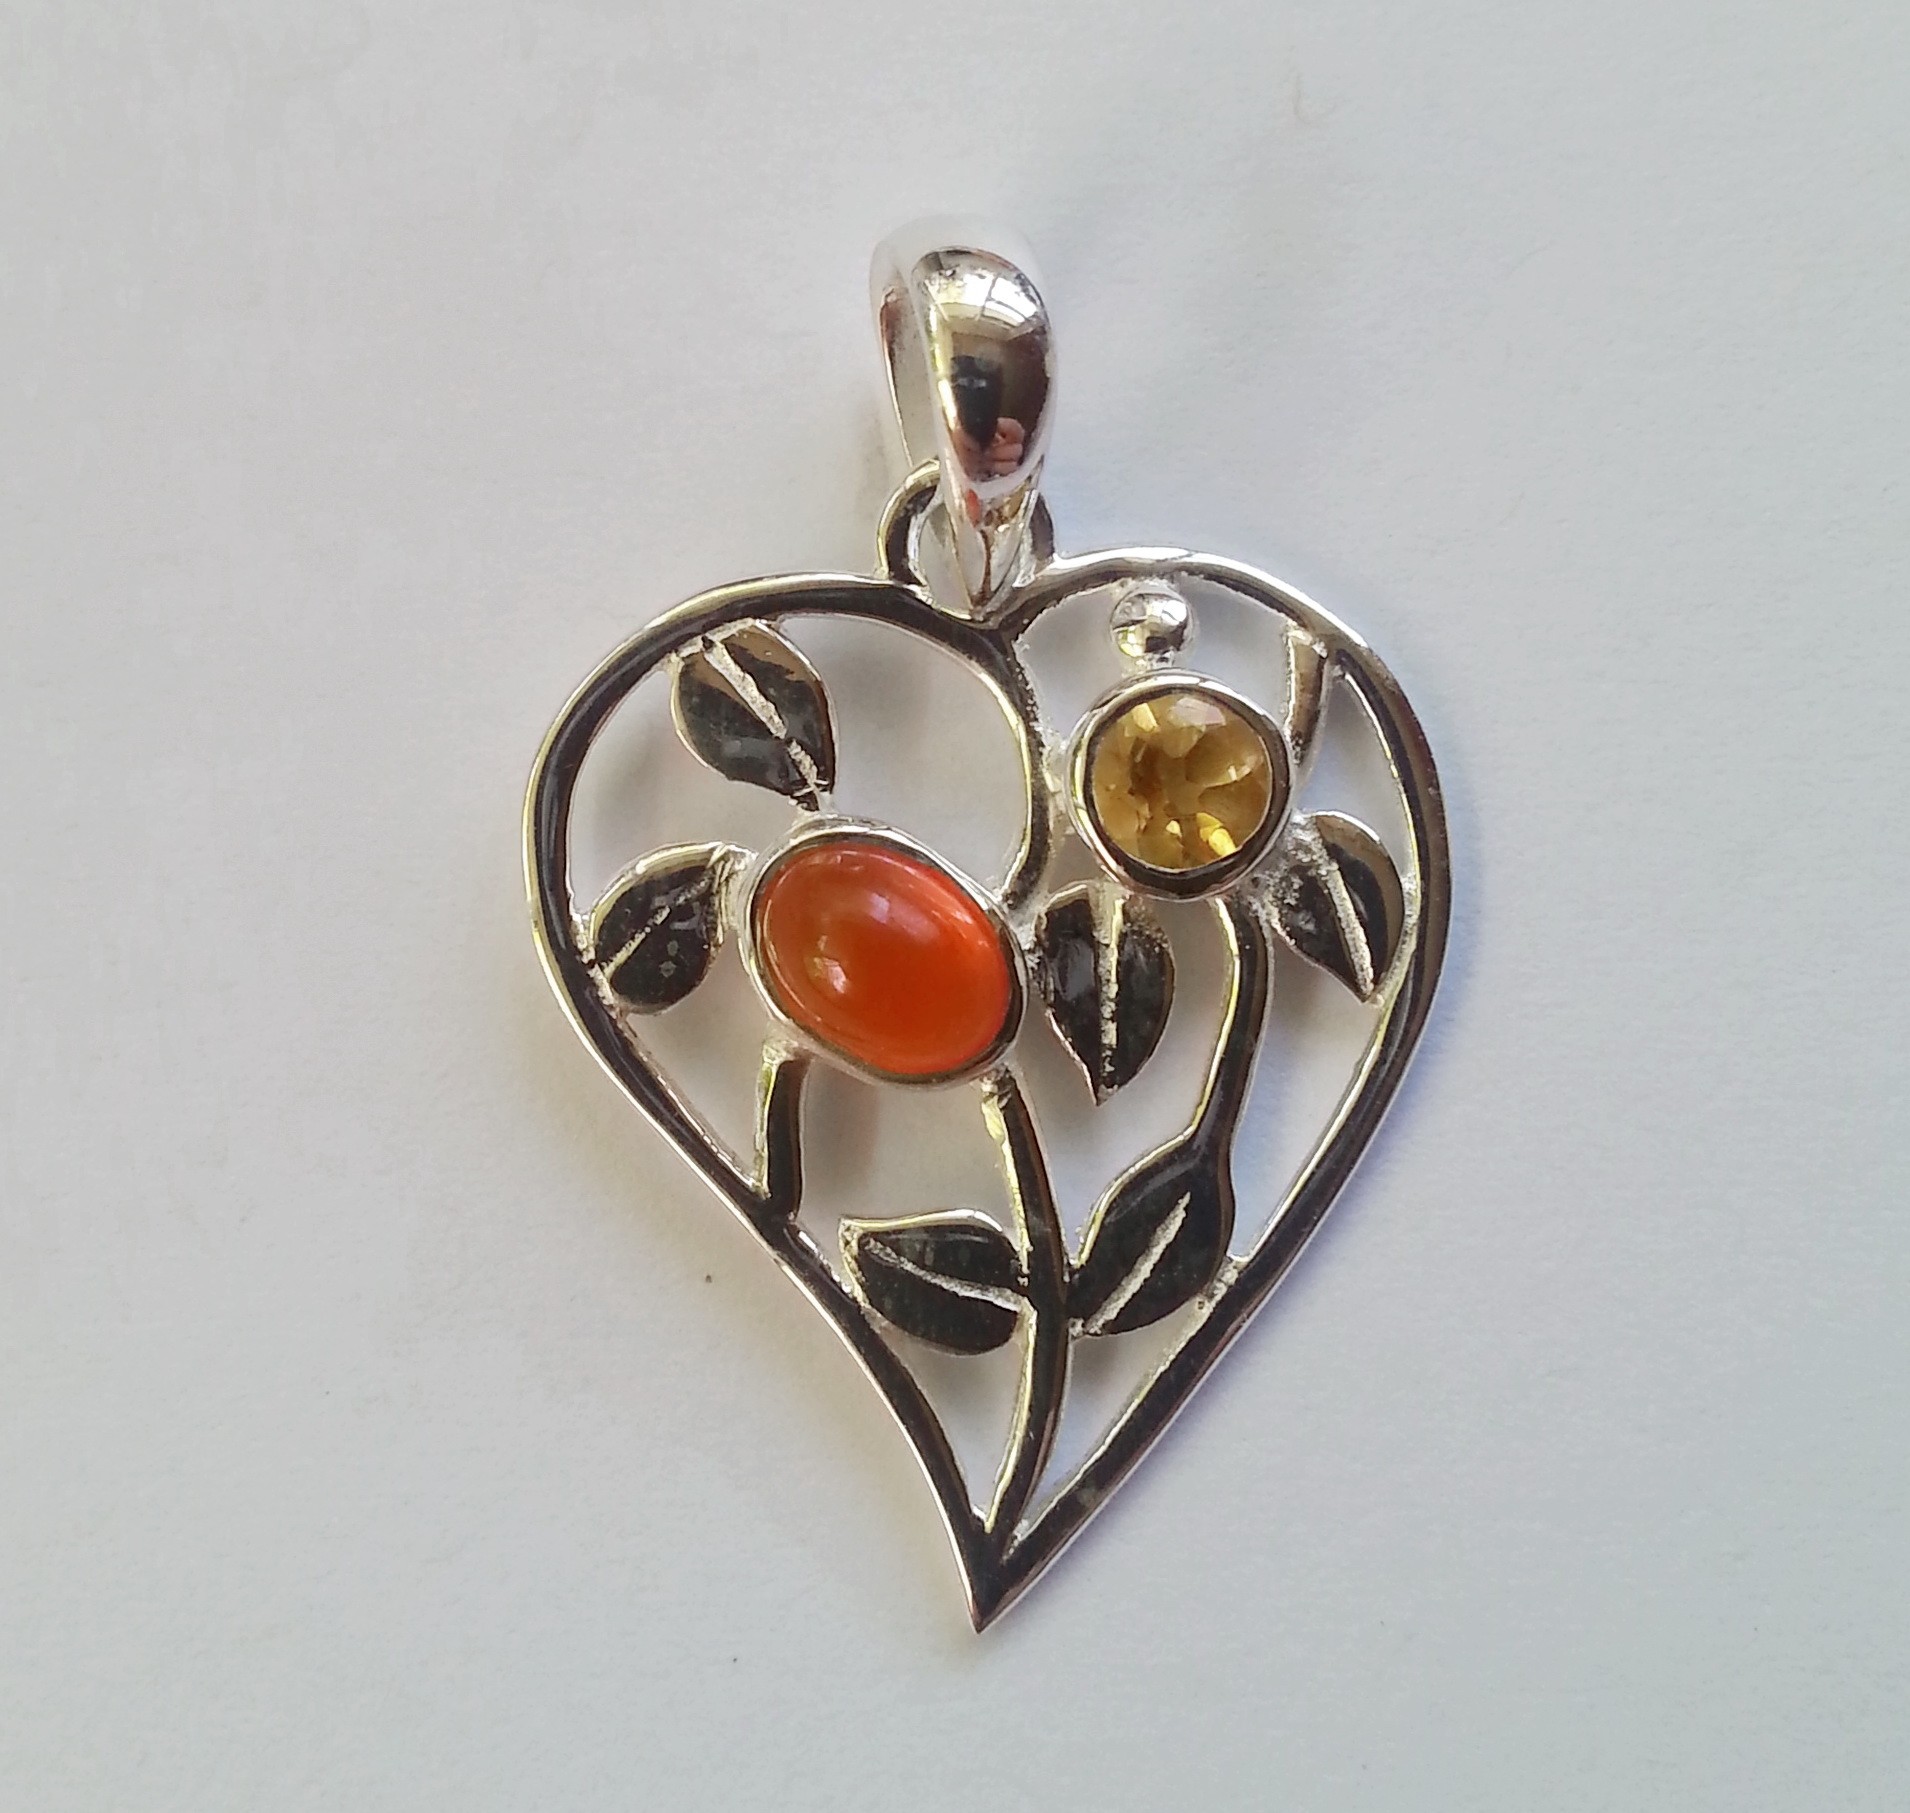 Heart shaped with 2 natural gemstones set in sterling silver